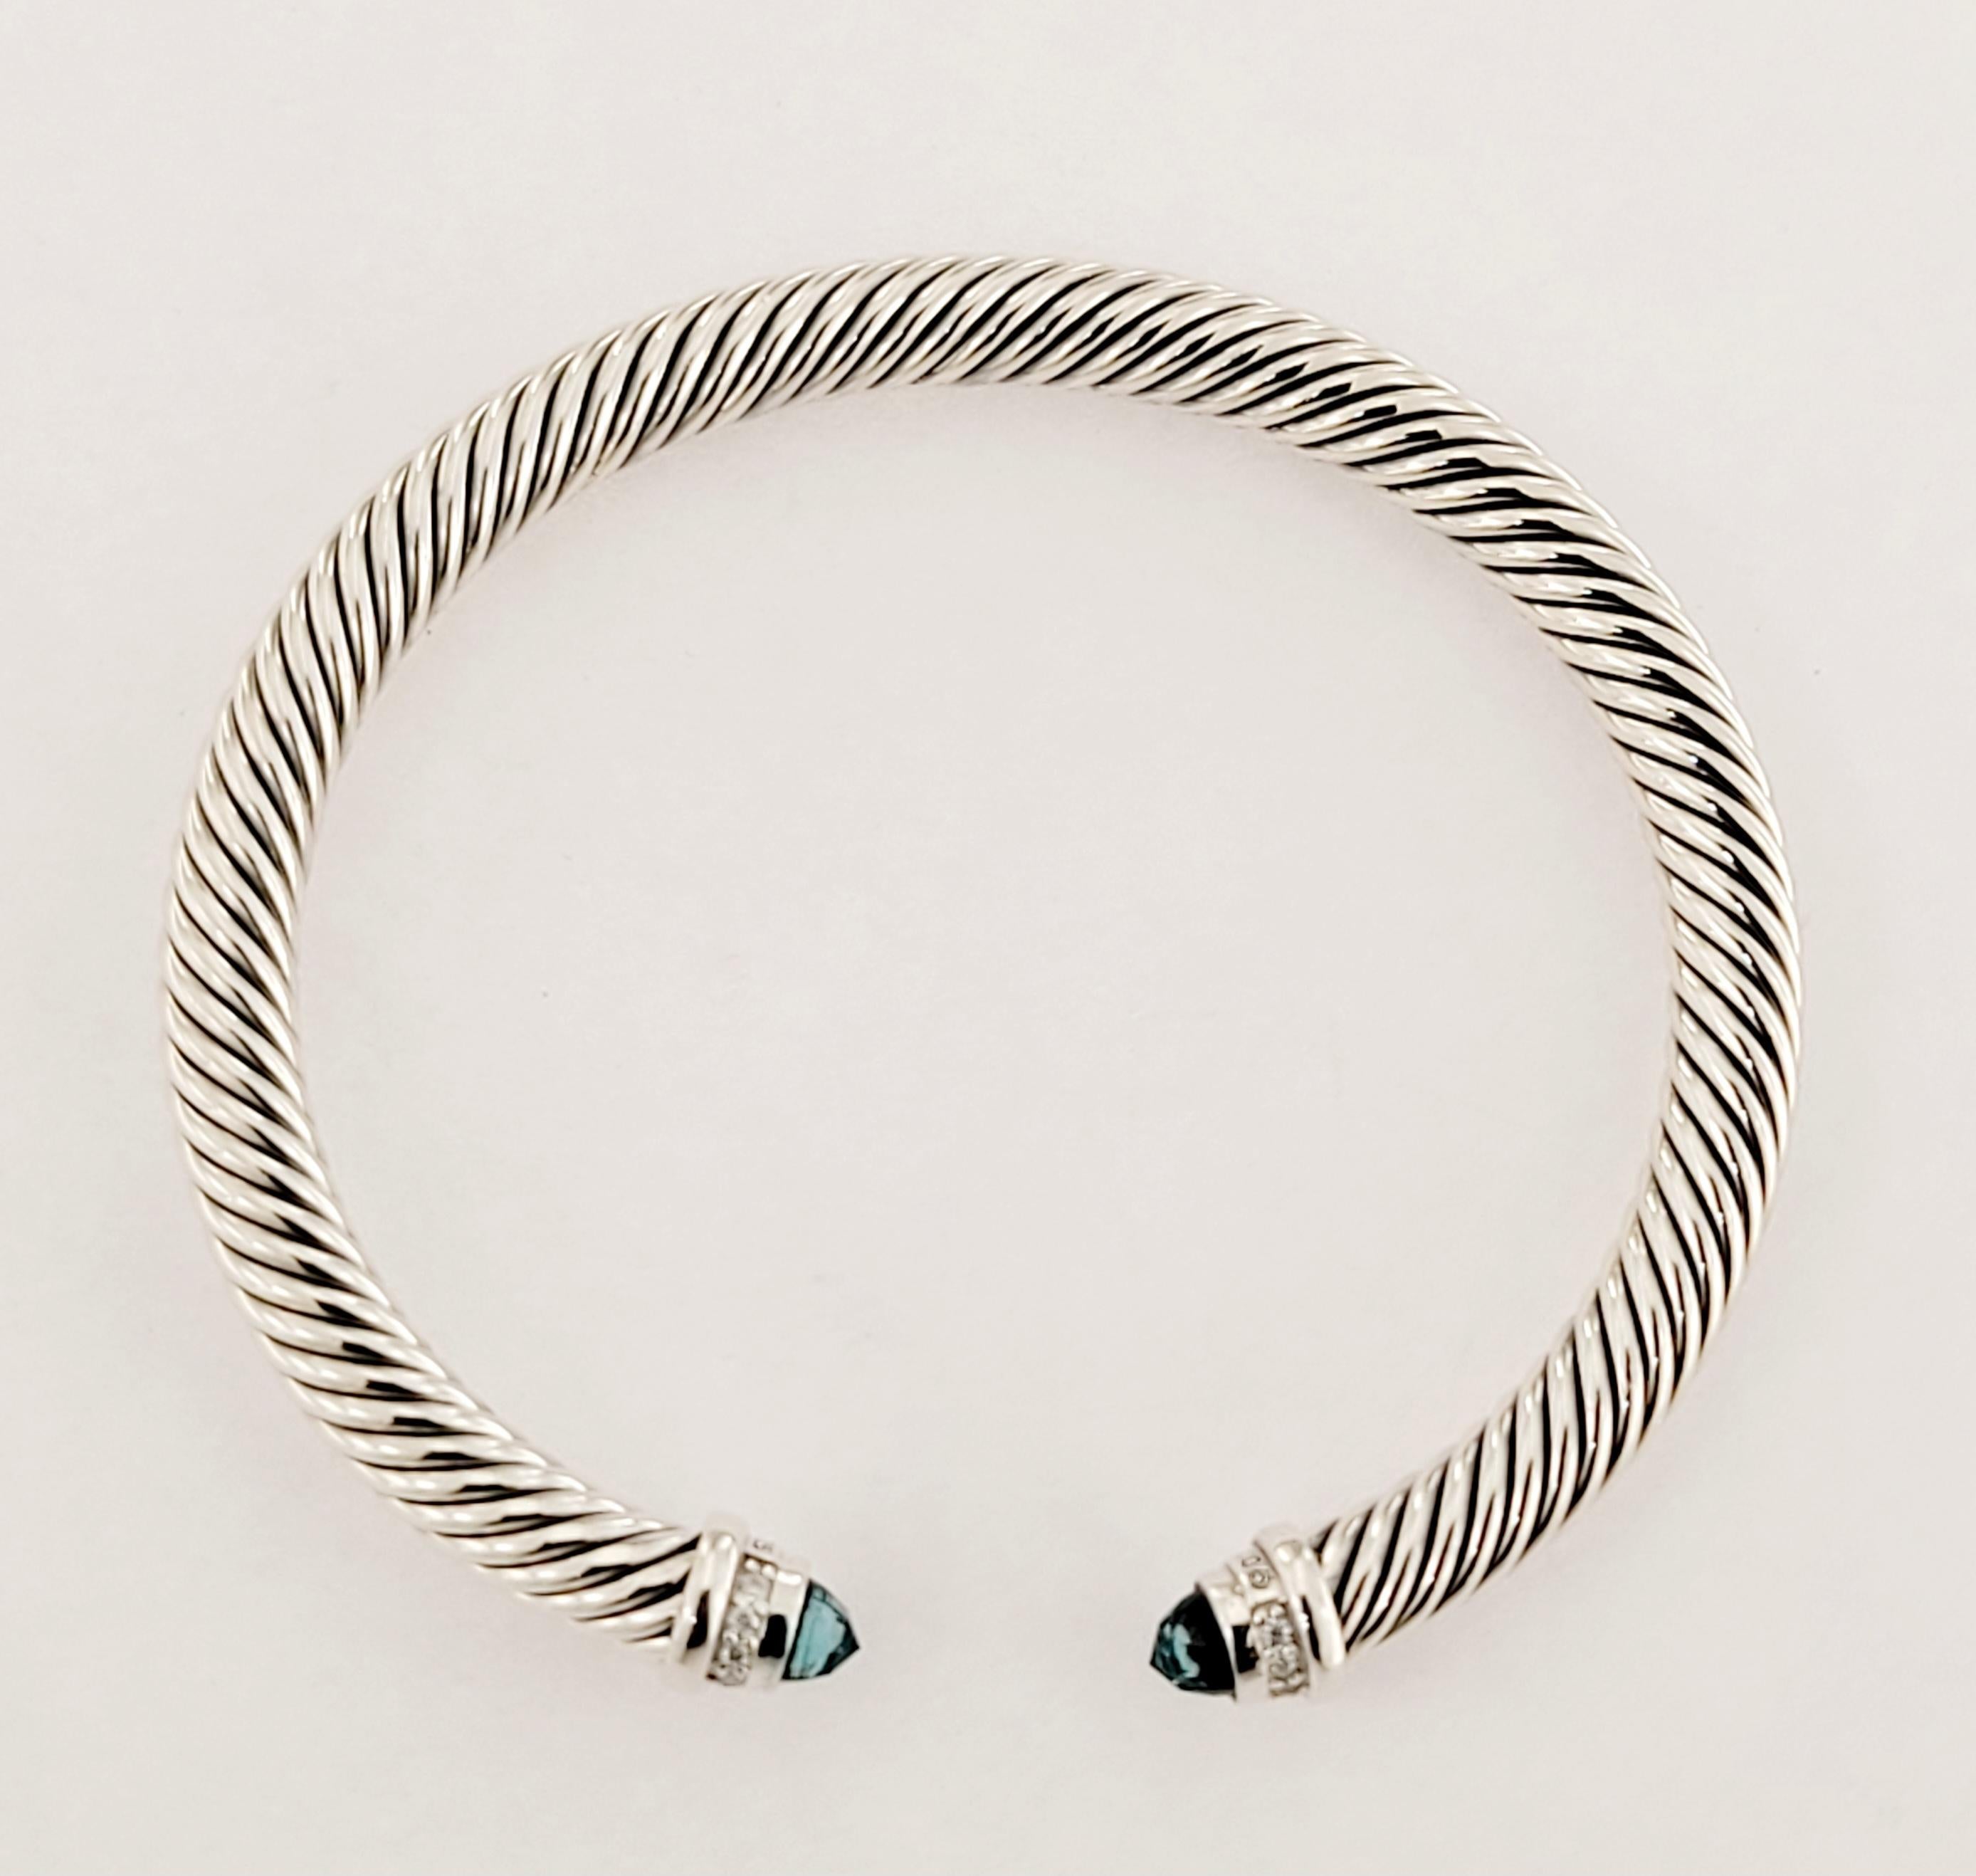 Brand David Yurman
Condition Never worn
Size small 
Gender Women
Material Sterling silver
 Hampton Topaz and  diamonds
Bracelet 5mm
Weight 24.6gr
Retail price $695
Comes with David Yurman pouch